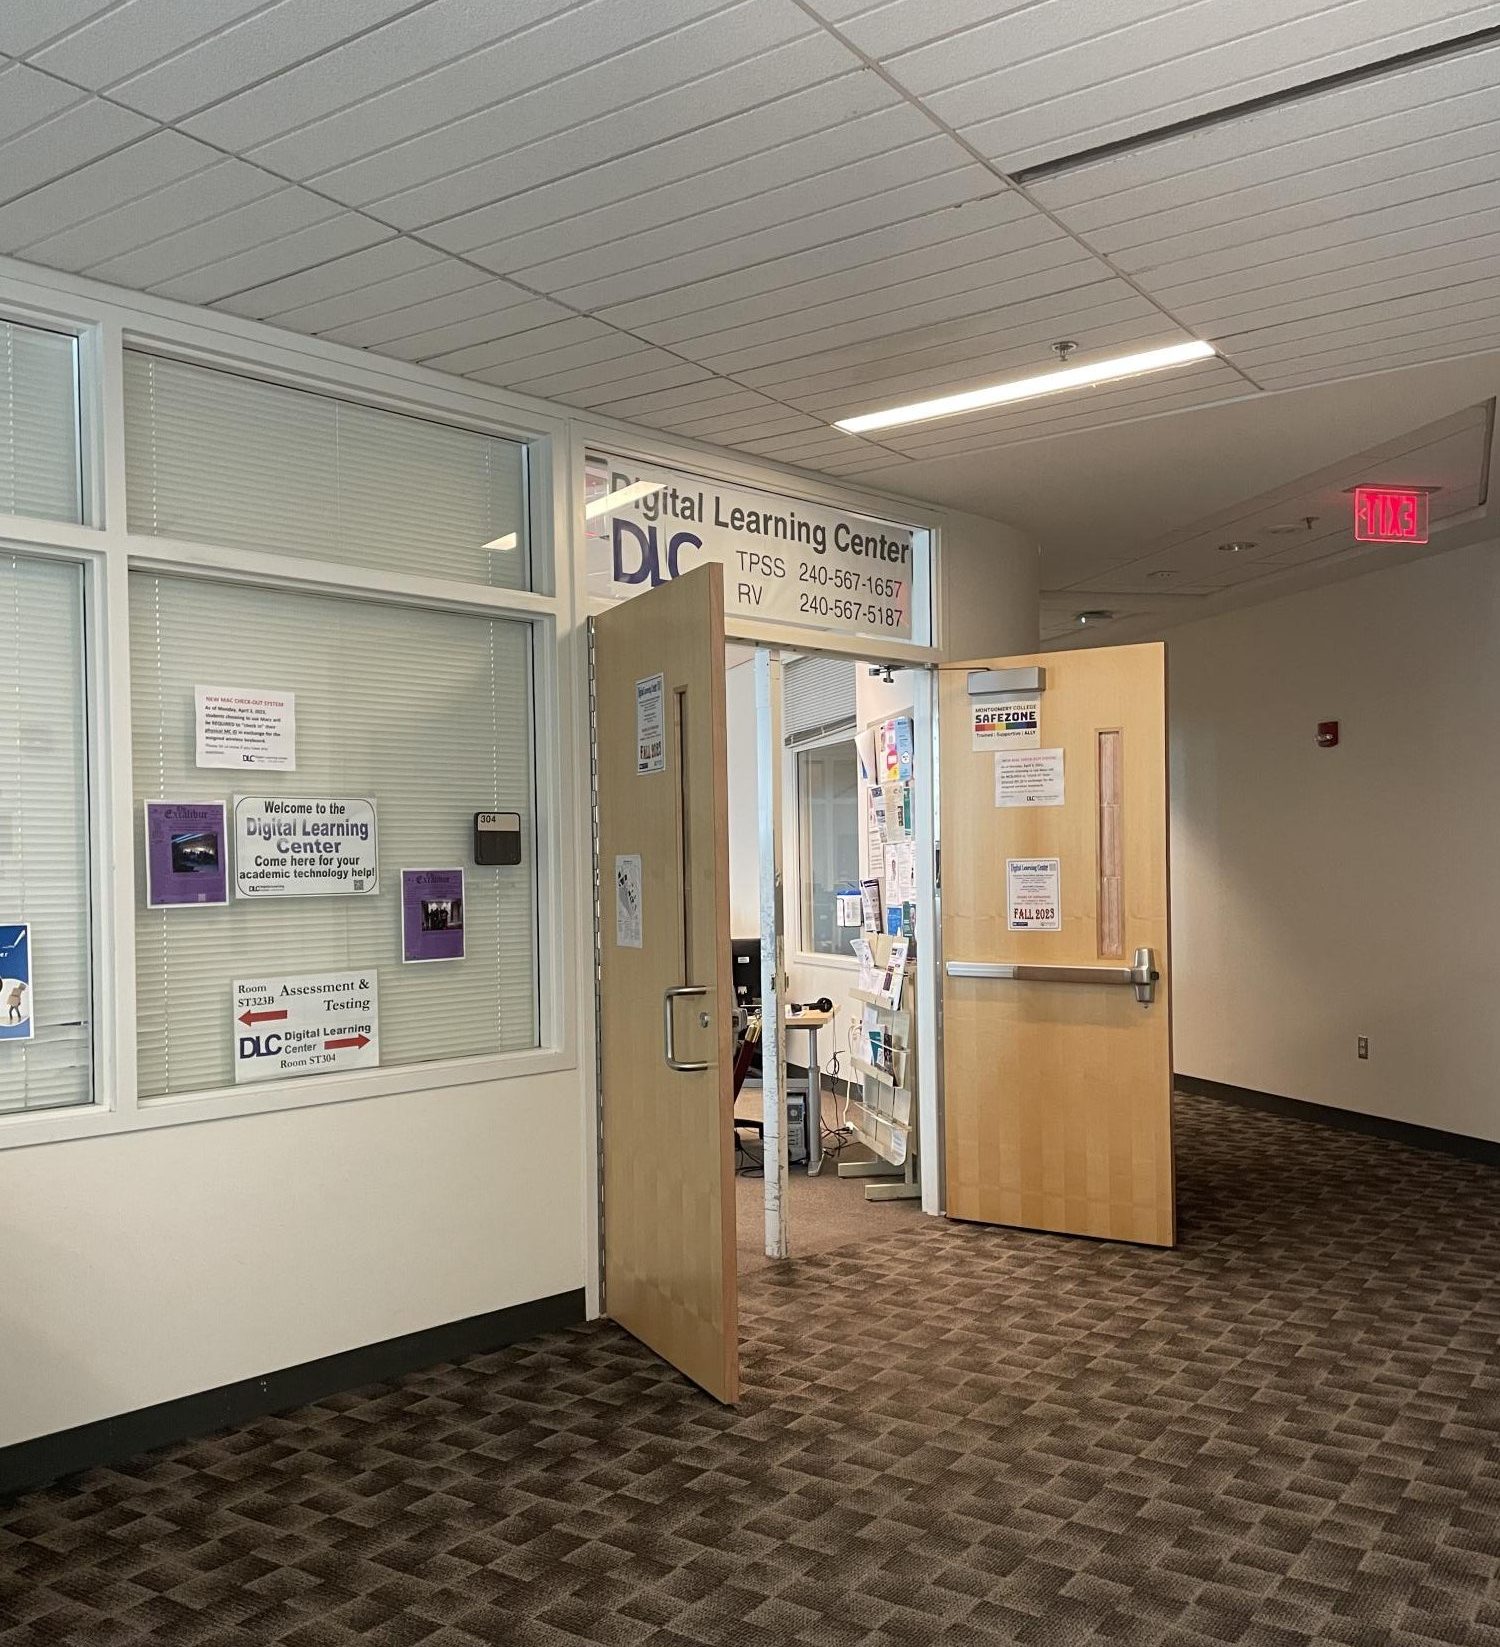 Entrance to the Digital Learning Center on the third floor of the Charlene R. Nunley Student Services Center Building room 304/304A